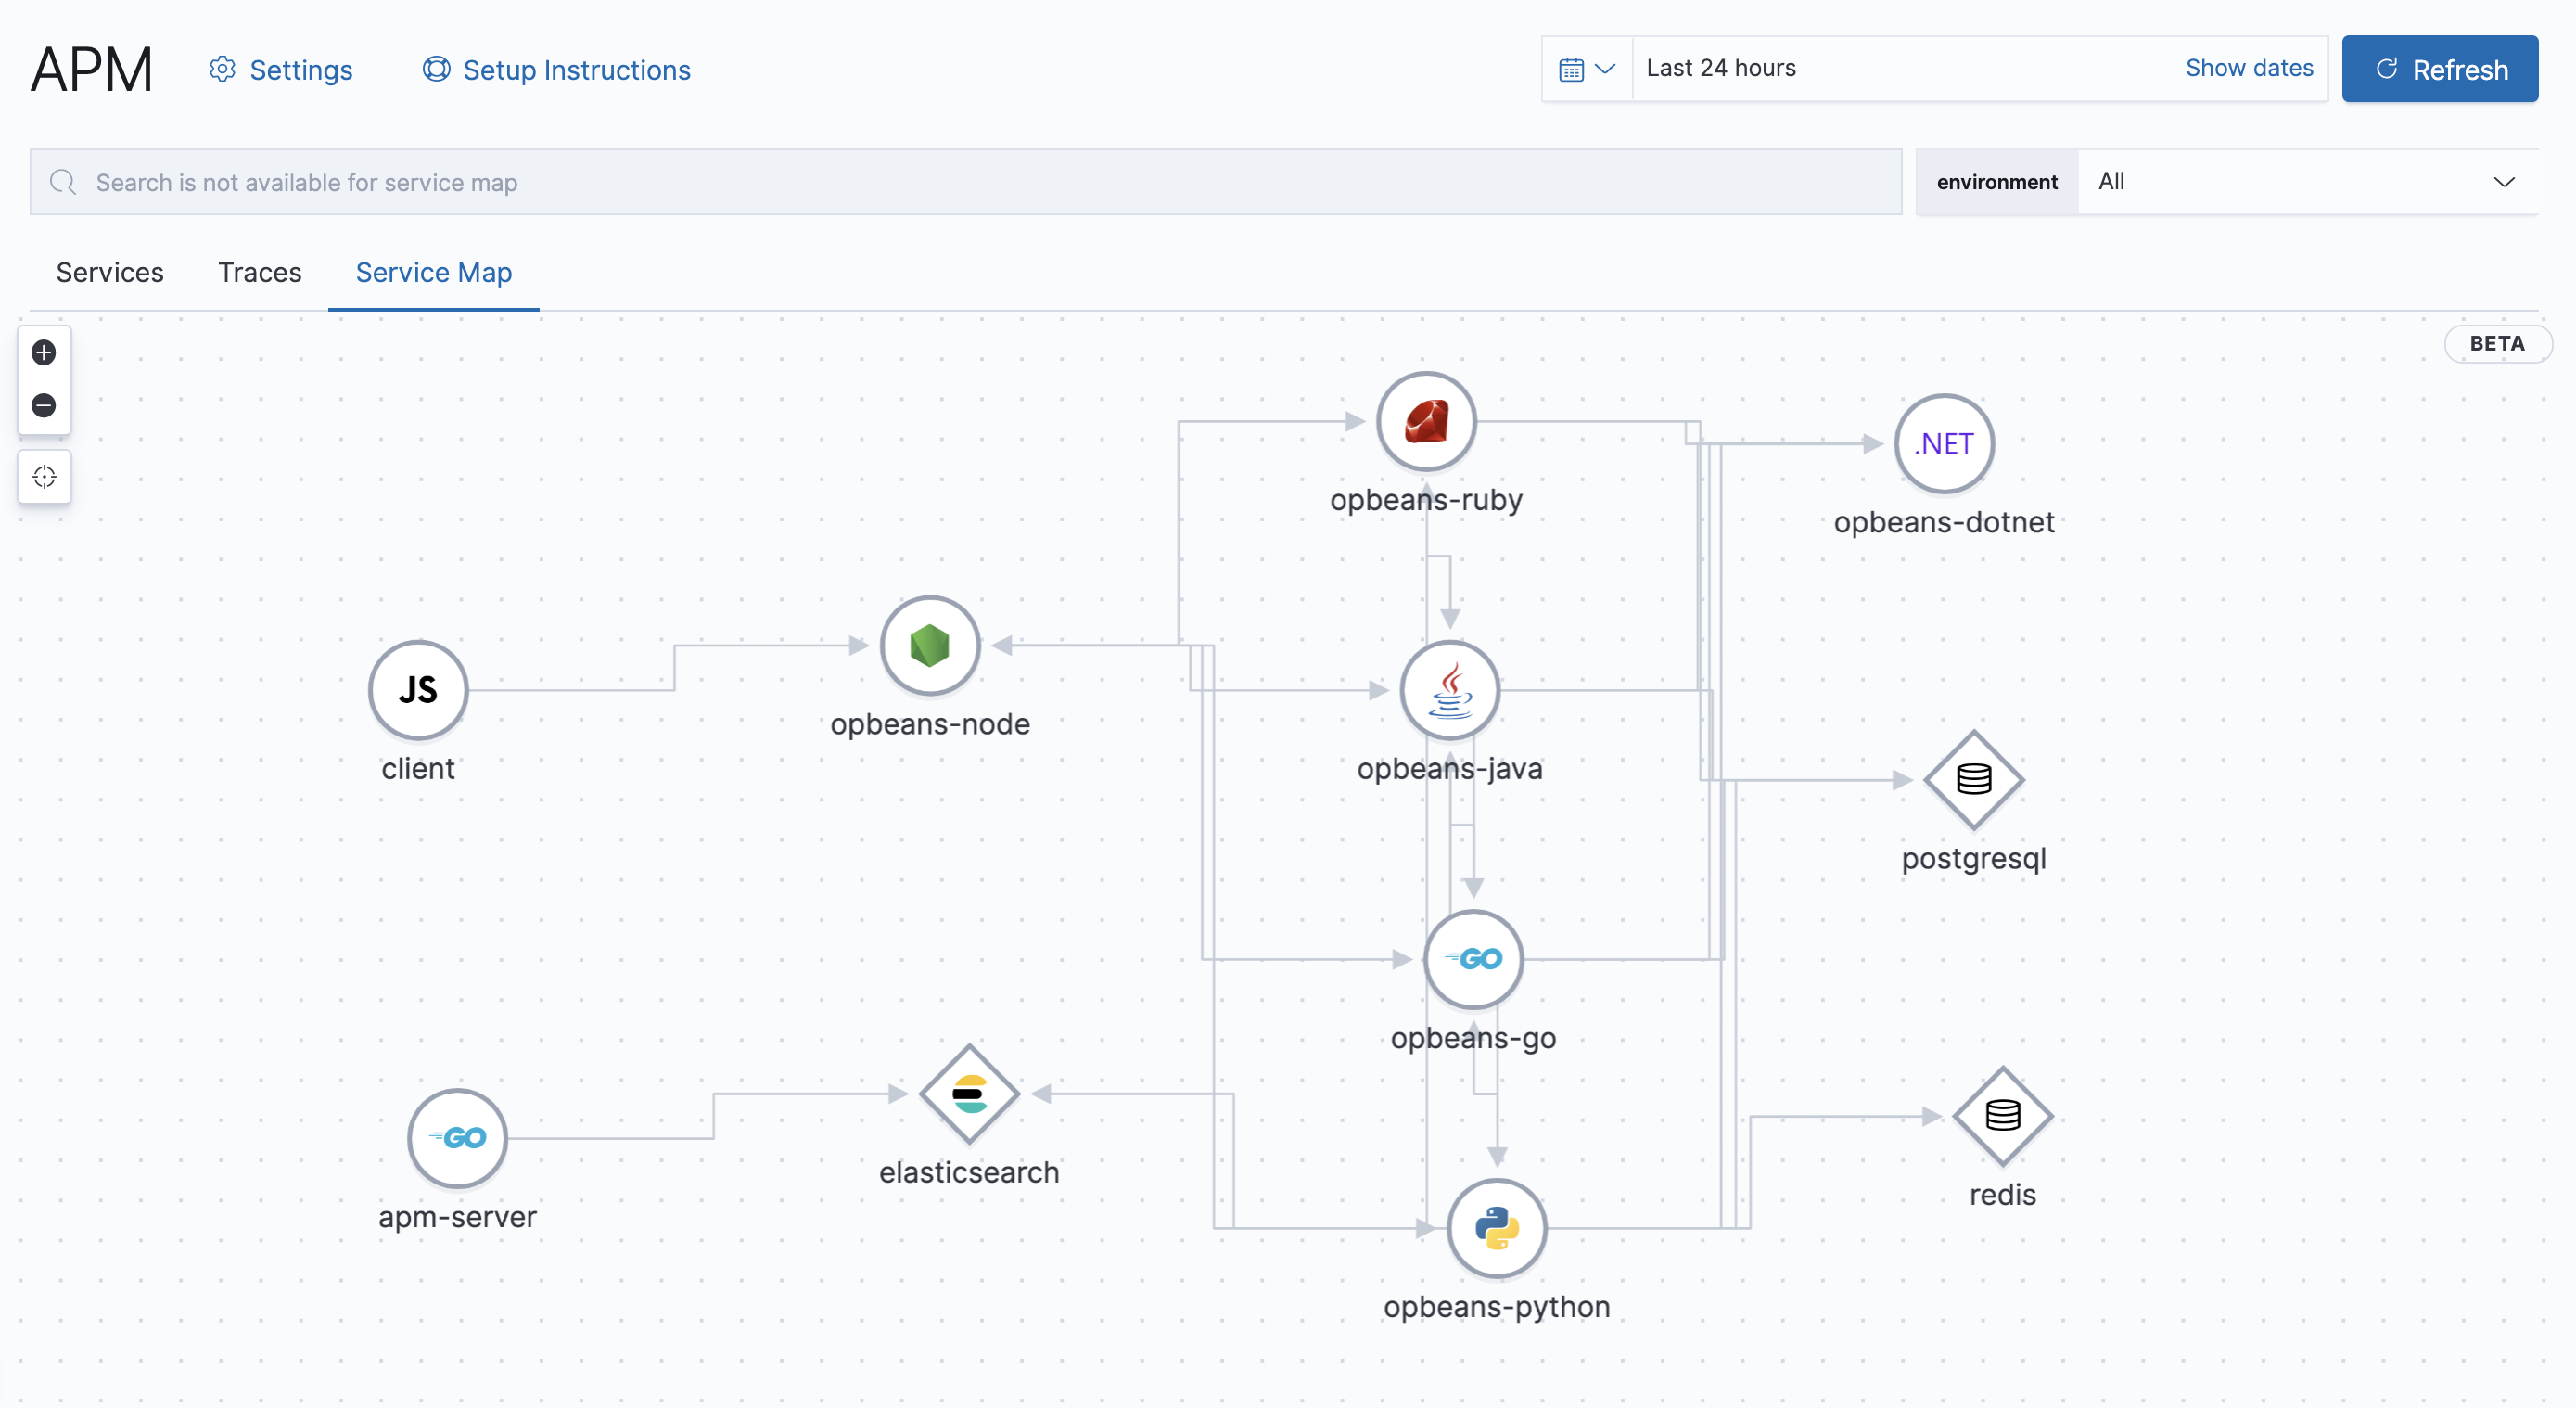 Example view of service maps in the APM app in Kibana